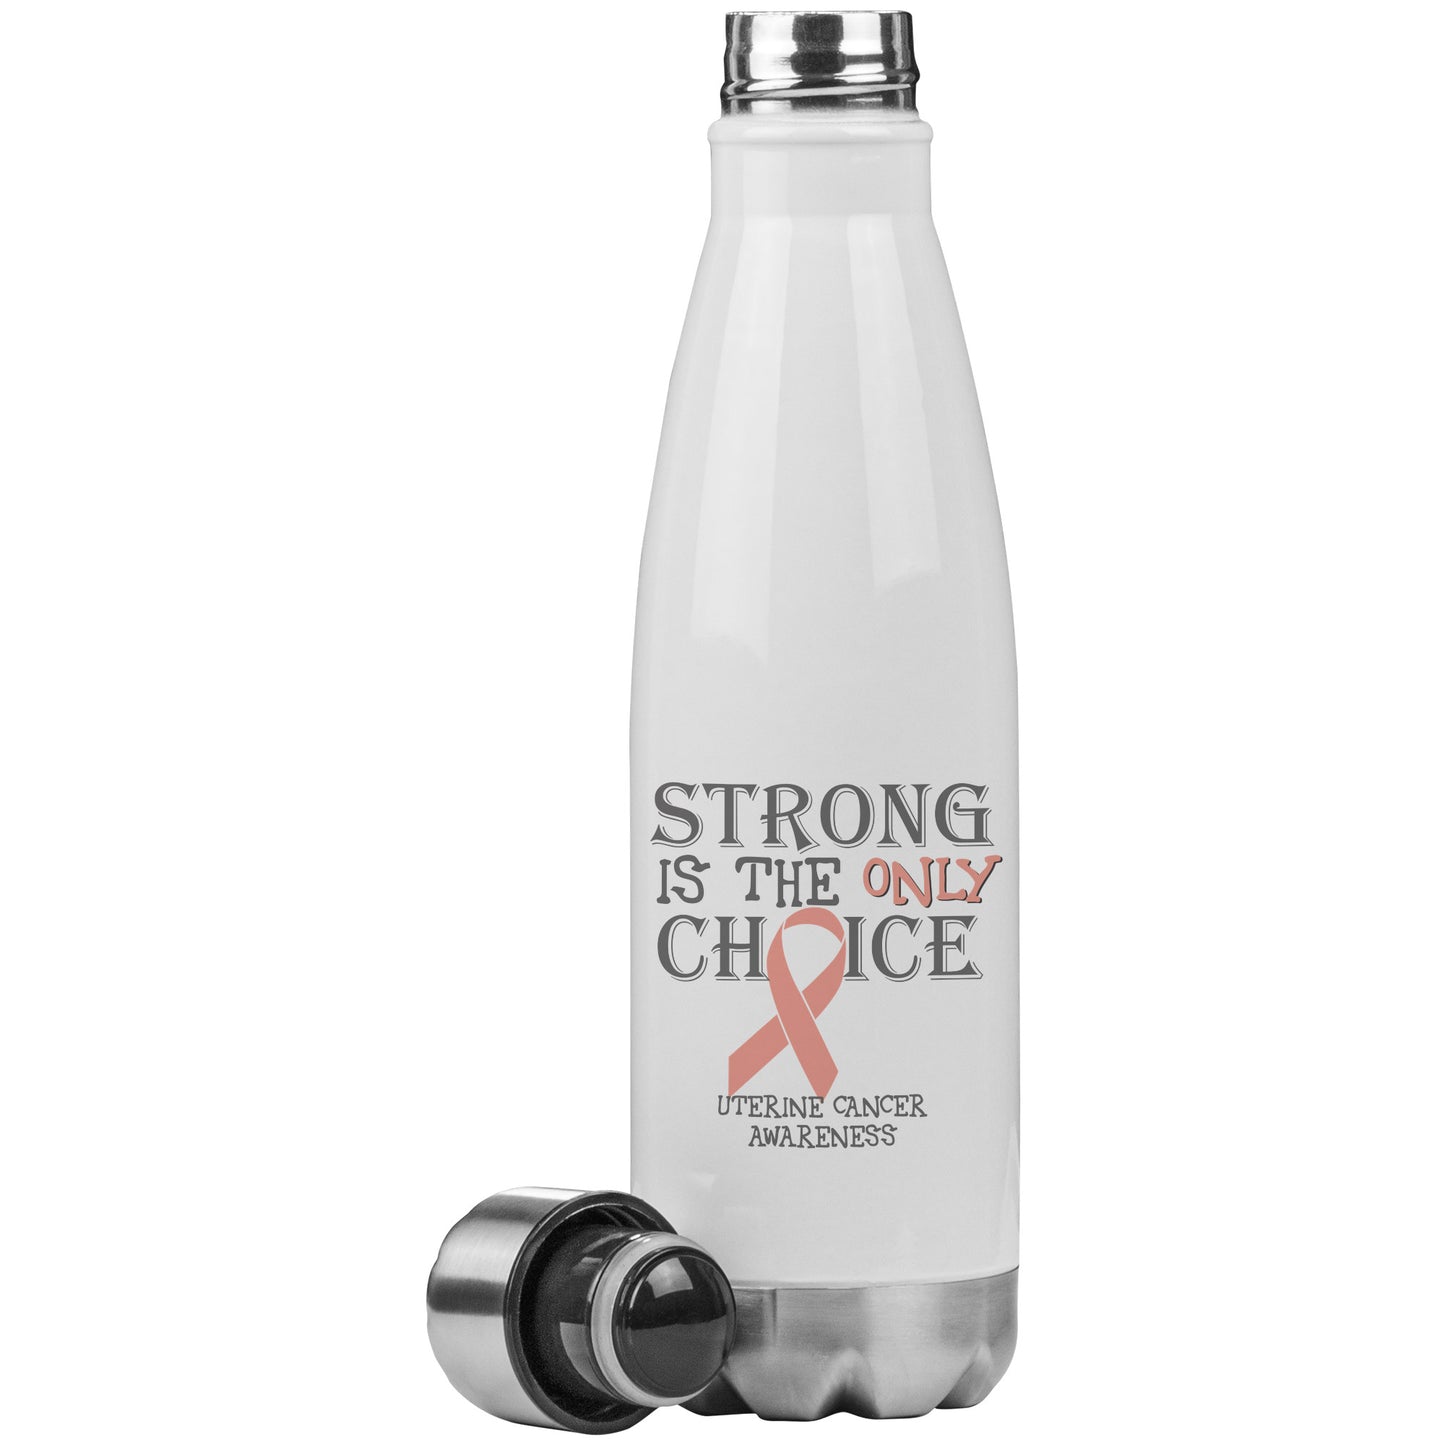 Strong is the Only Choice -Uterine Cancer Awareness 20oz Insulated Water Bottle